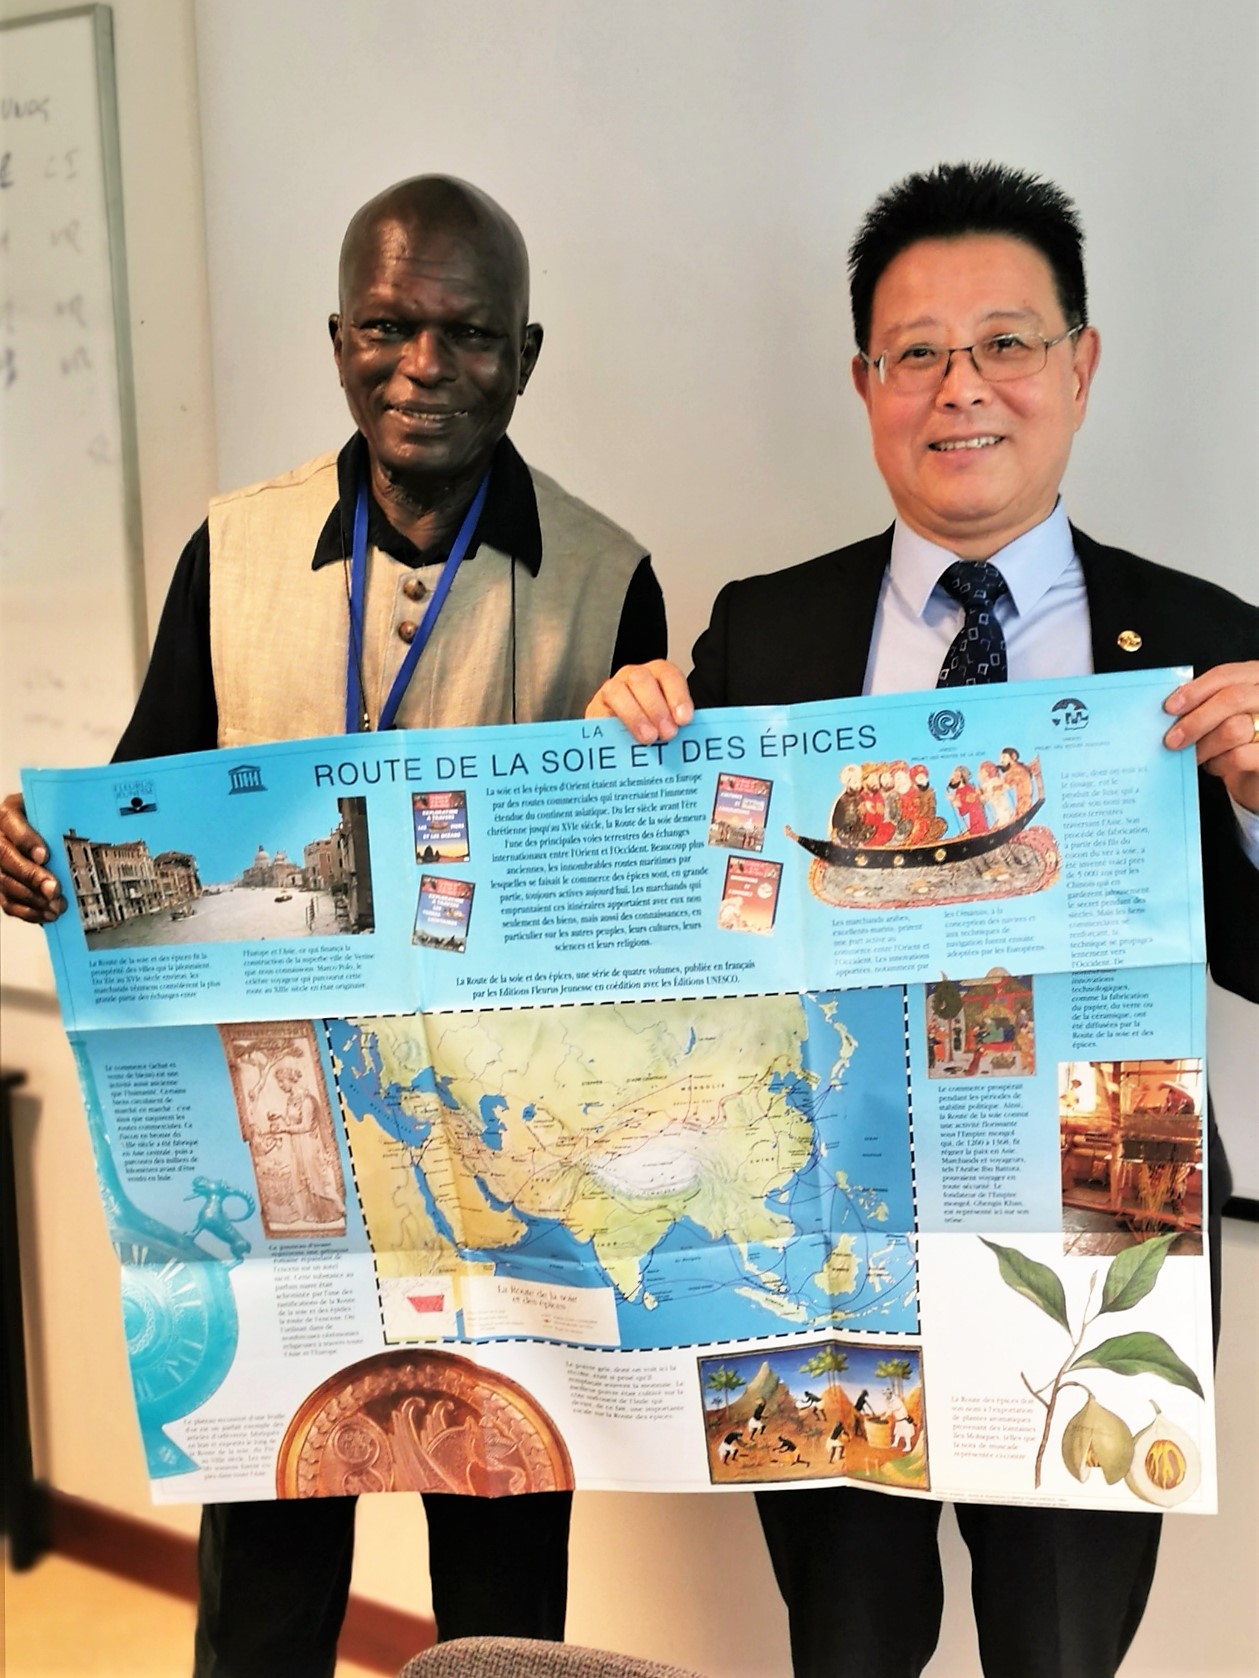 Doudou Diène & Feng Jing - Fellow travellers in the July-August 1990 Desert Route Expedition of the UNESCO Silk Roads Project (20 June 2020)